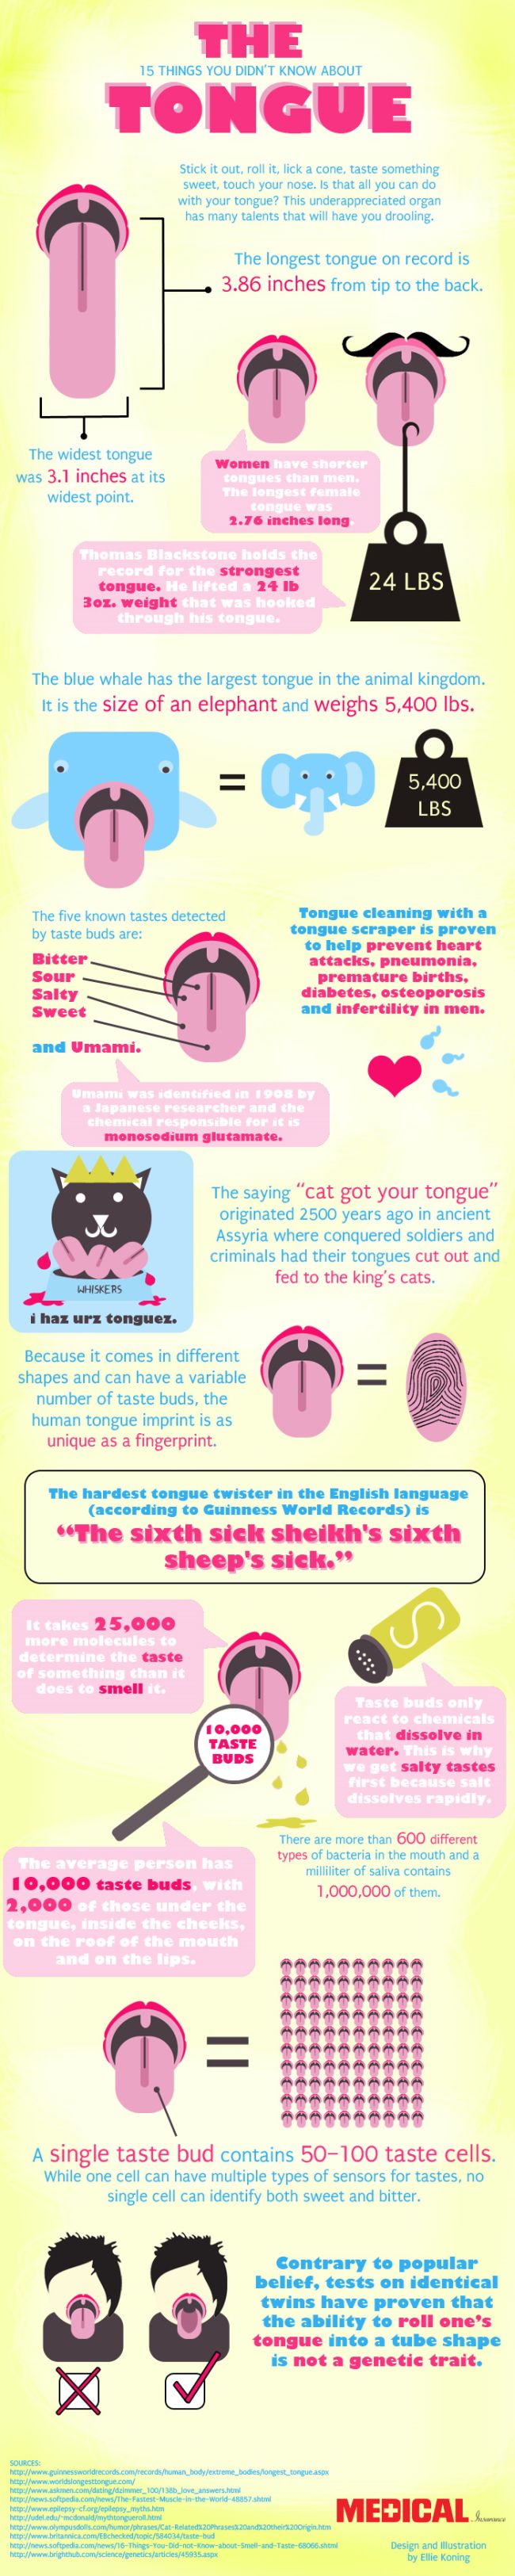 15 Things You Didn’t Know about the Human Tongue